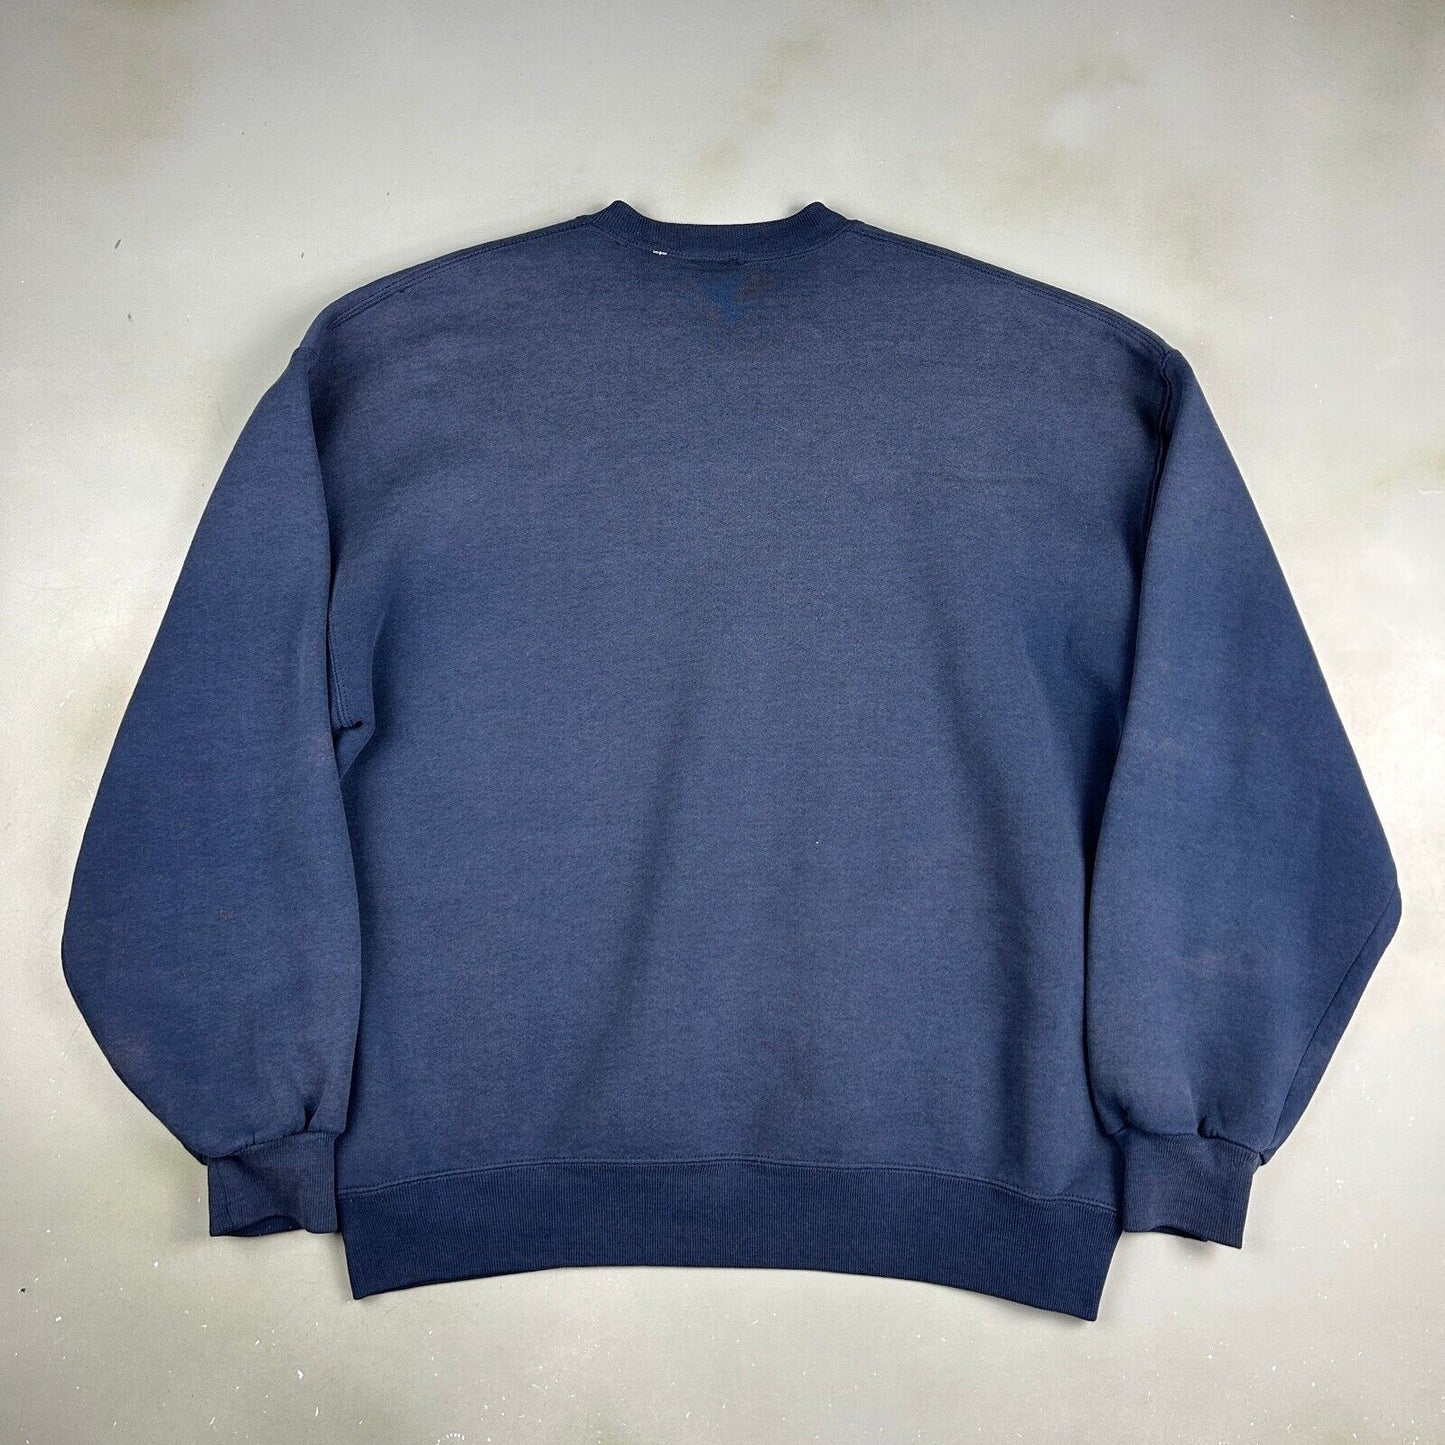 VINTAGE Russell Athletic Faded Blank Navy Crewneck Sweater sz Large Adult